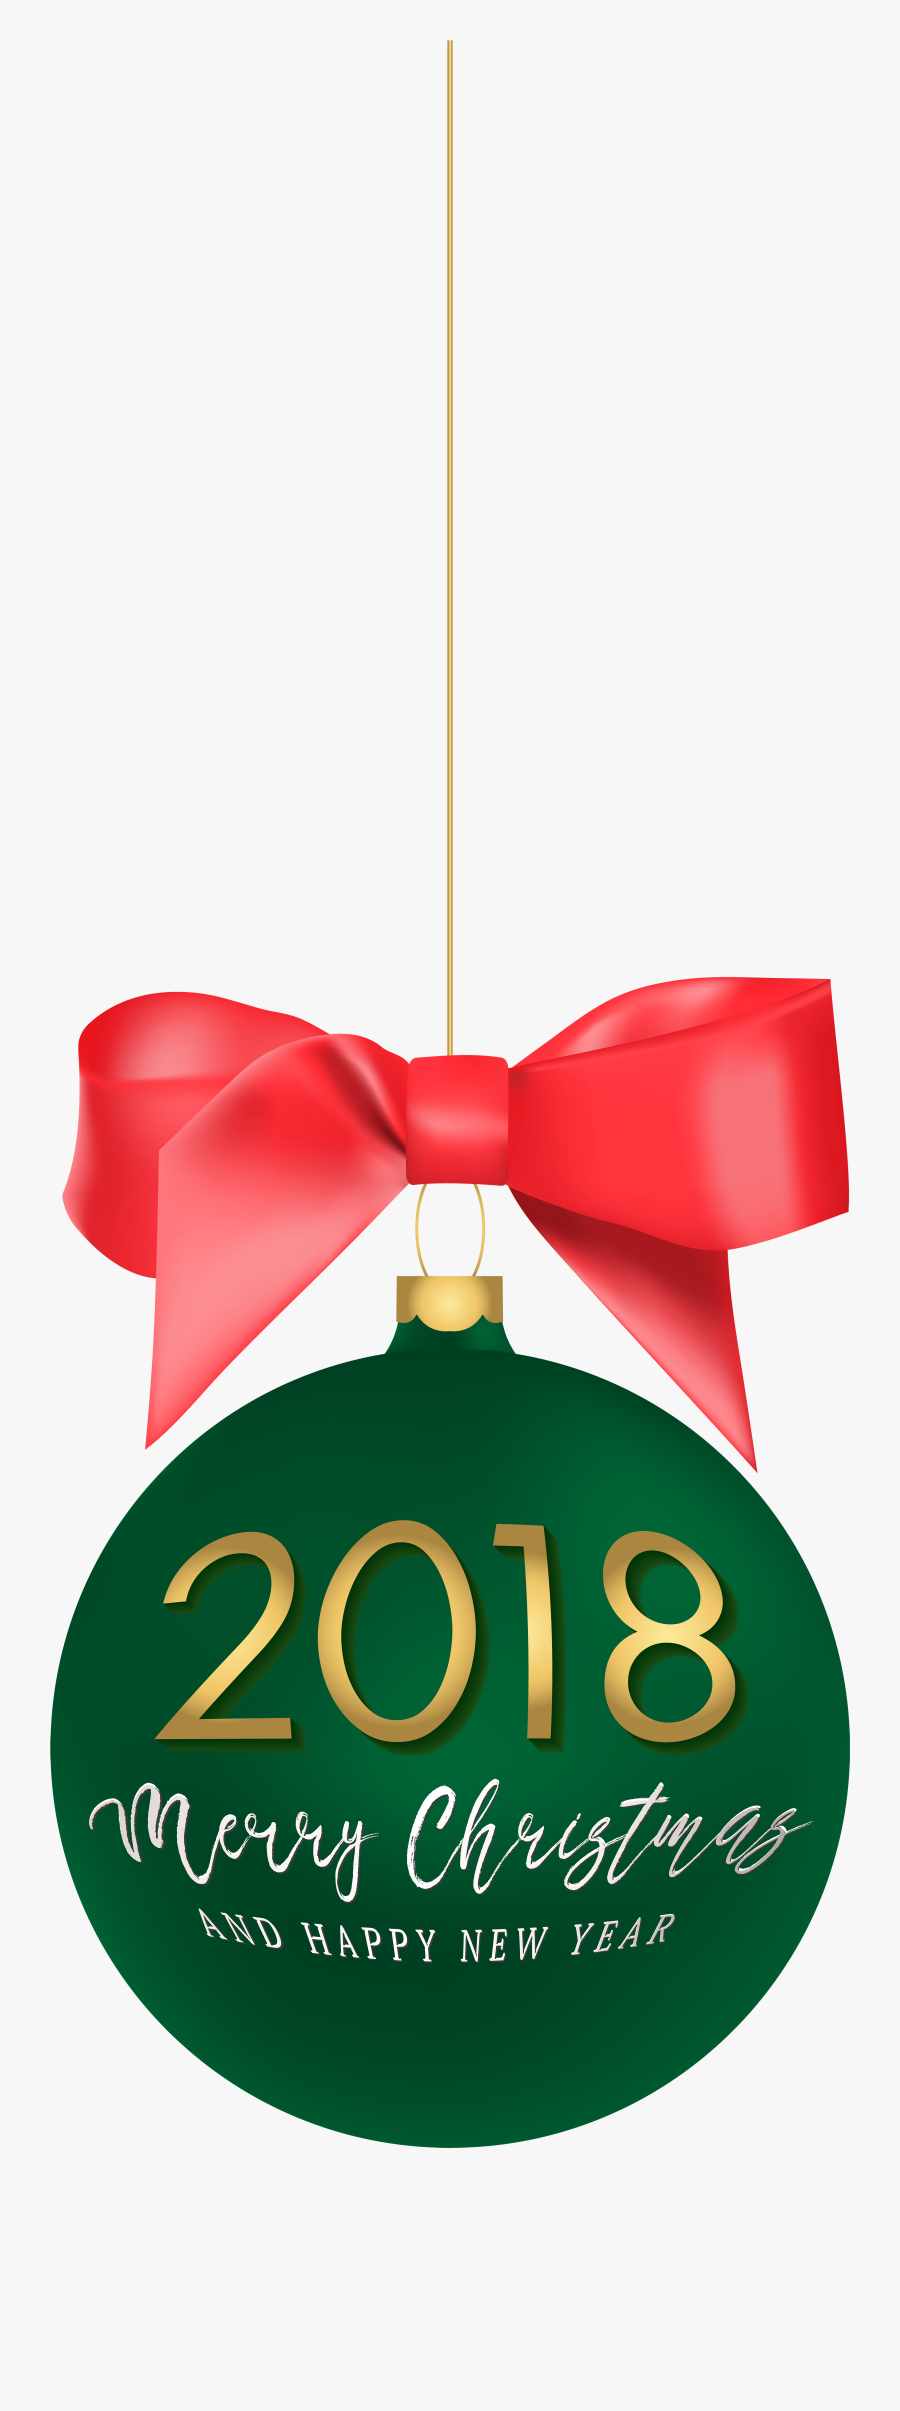 New Years Ball Png - 2018 Merry Christmas Ball, Transparent Clipart